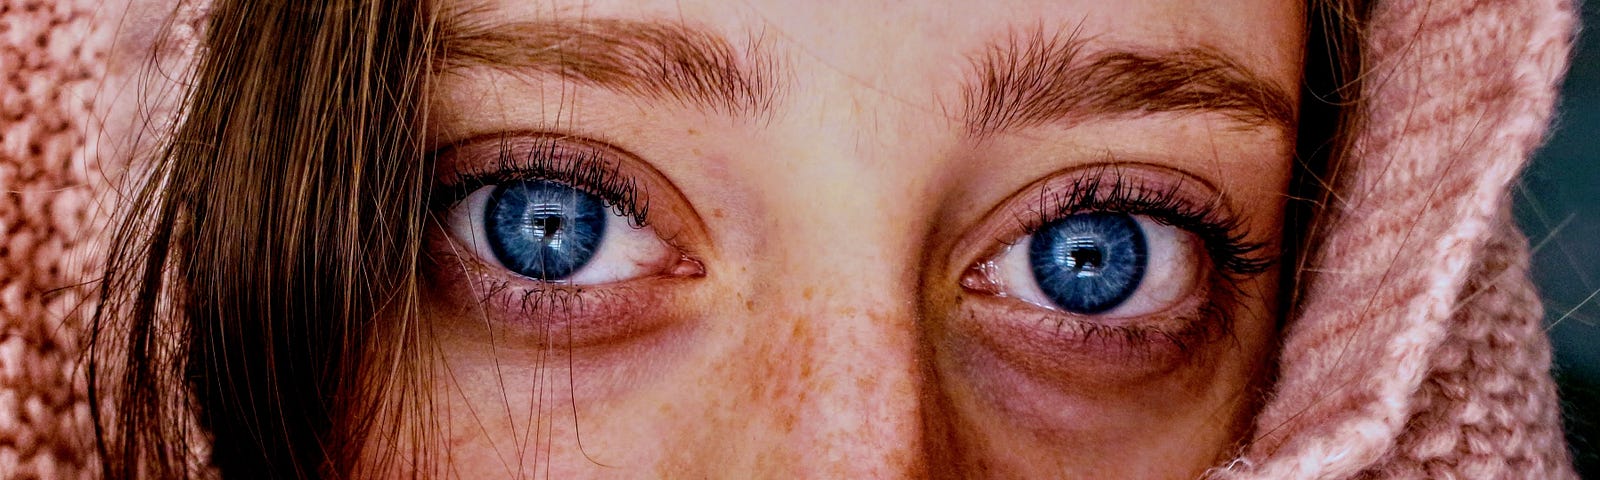 blue eyes of a woman wearing a pink sweater that wraps around her face